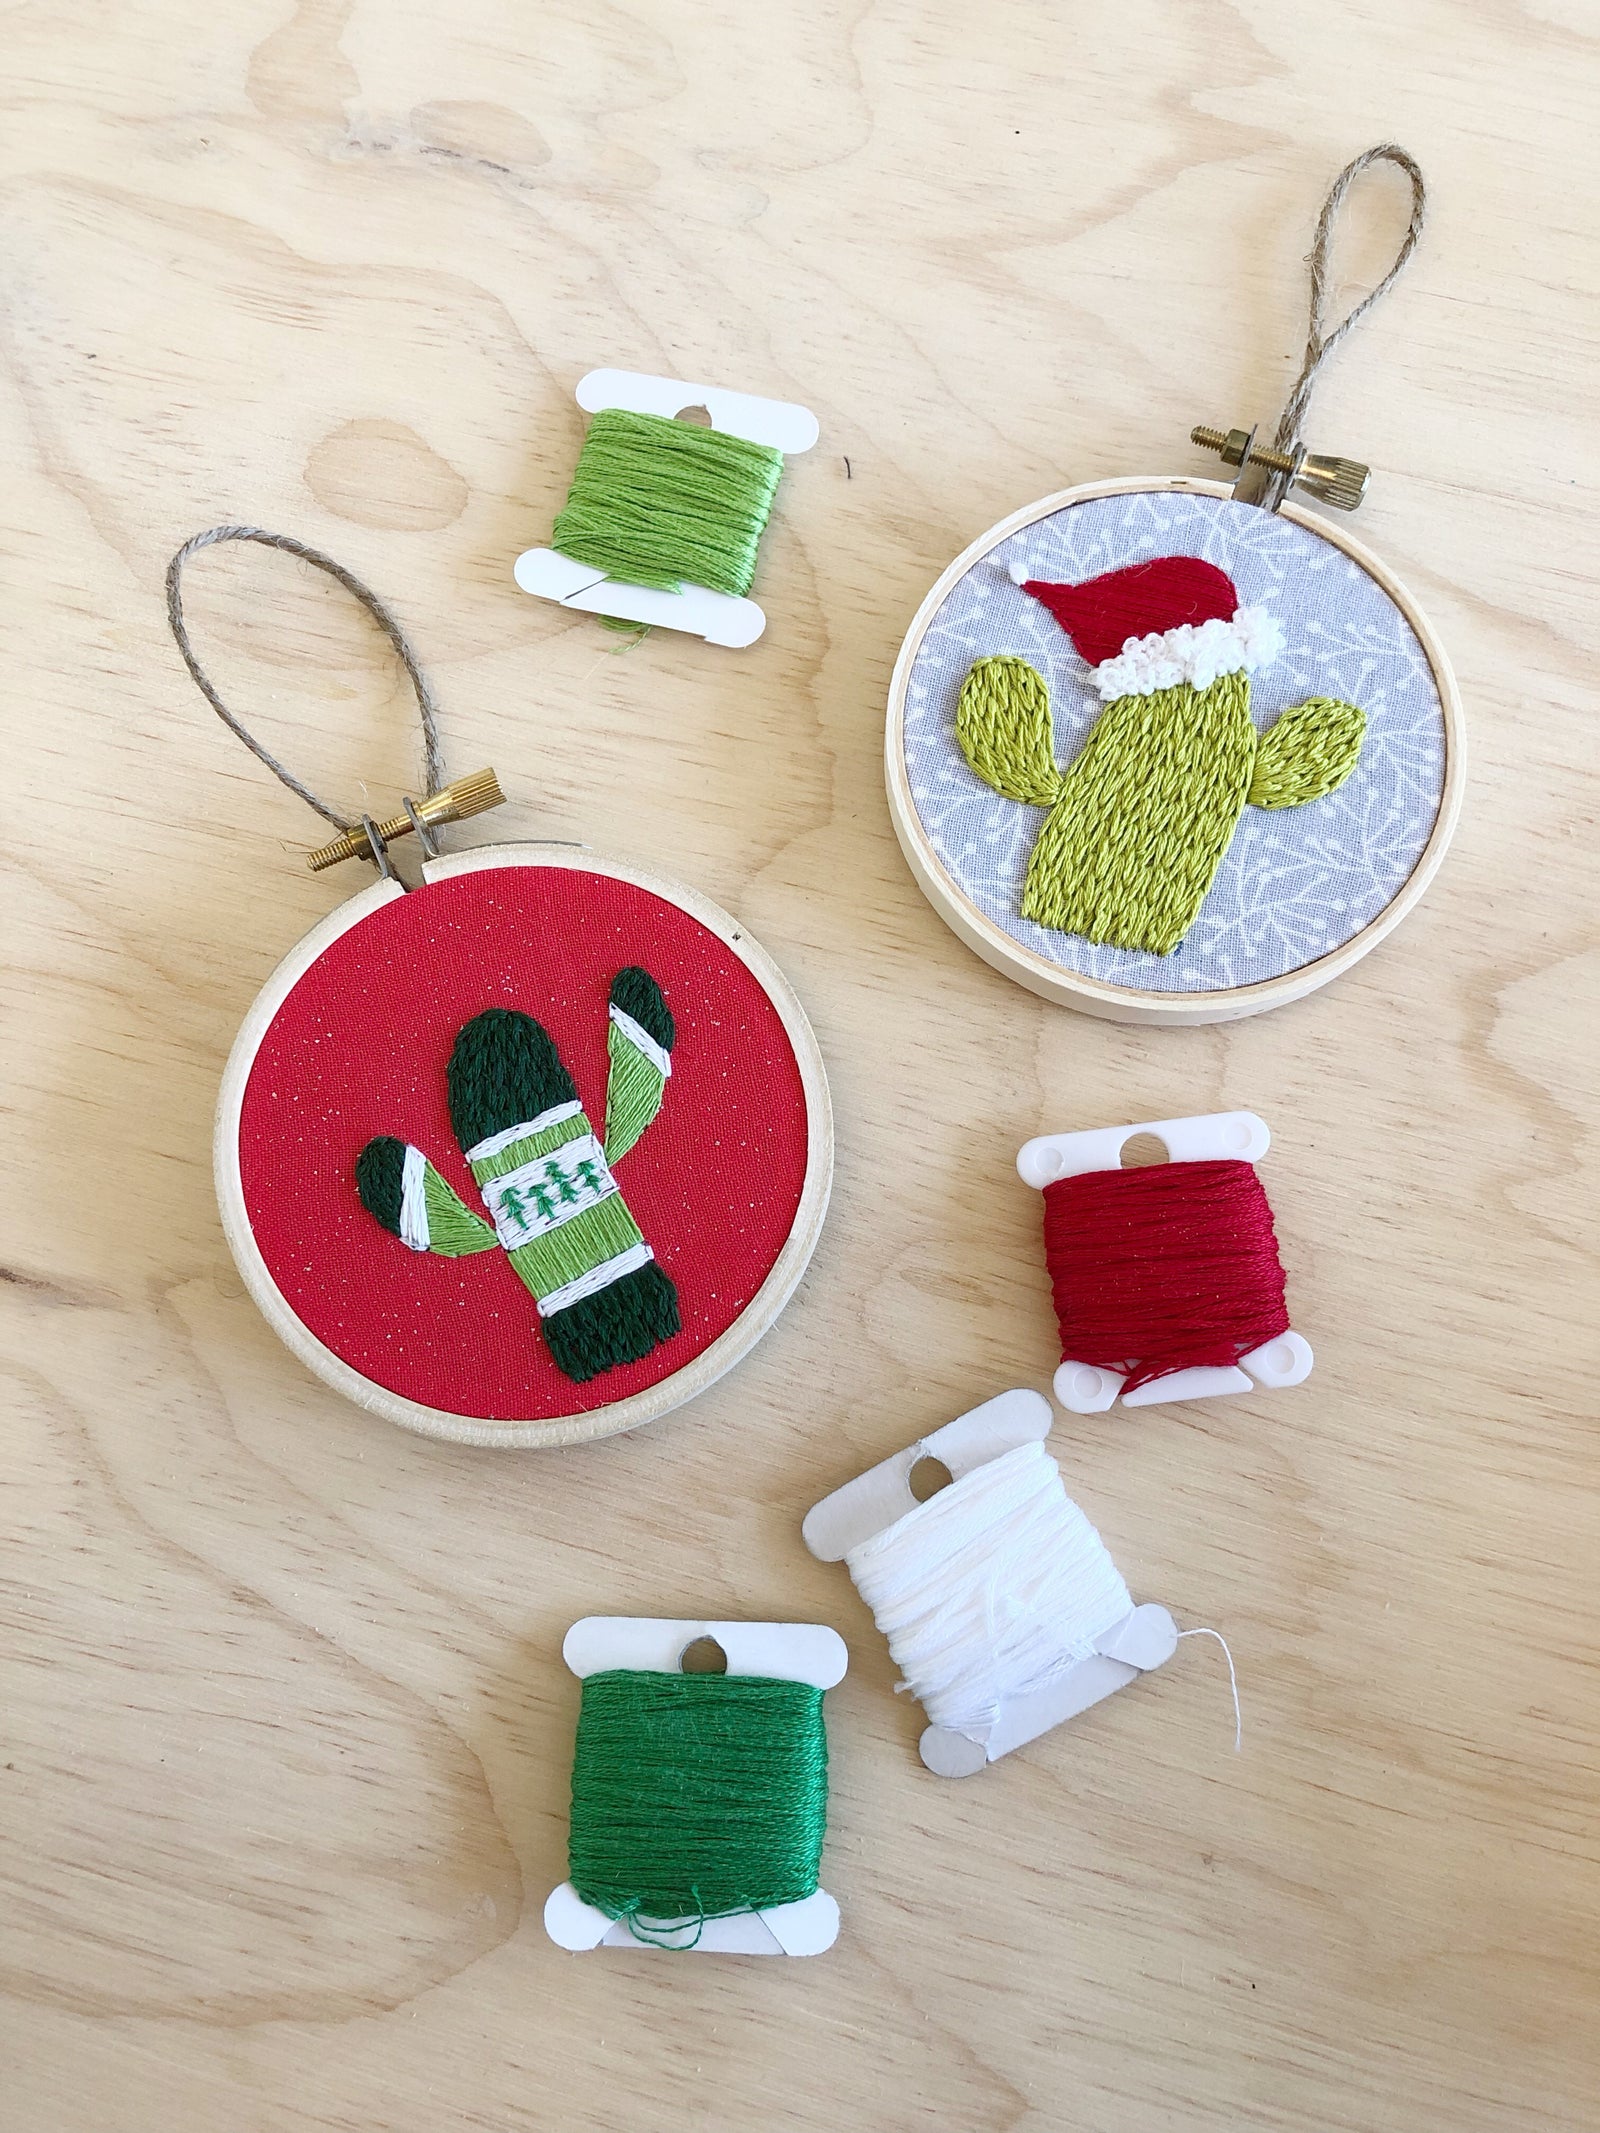 EMBROIDERY CLASS: Holiday Cactus Ornament Workshop